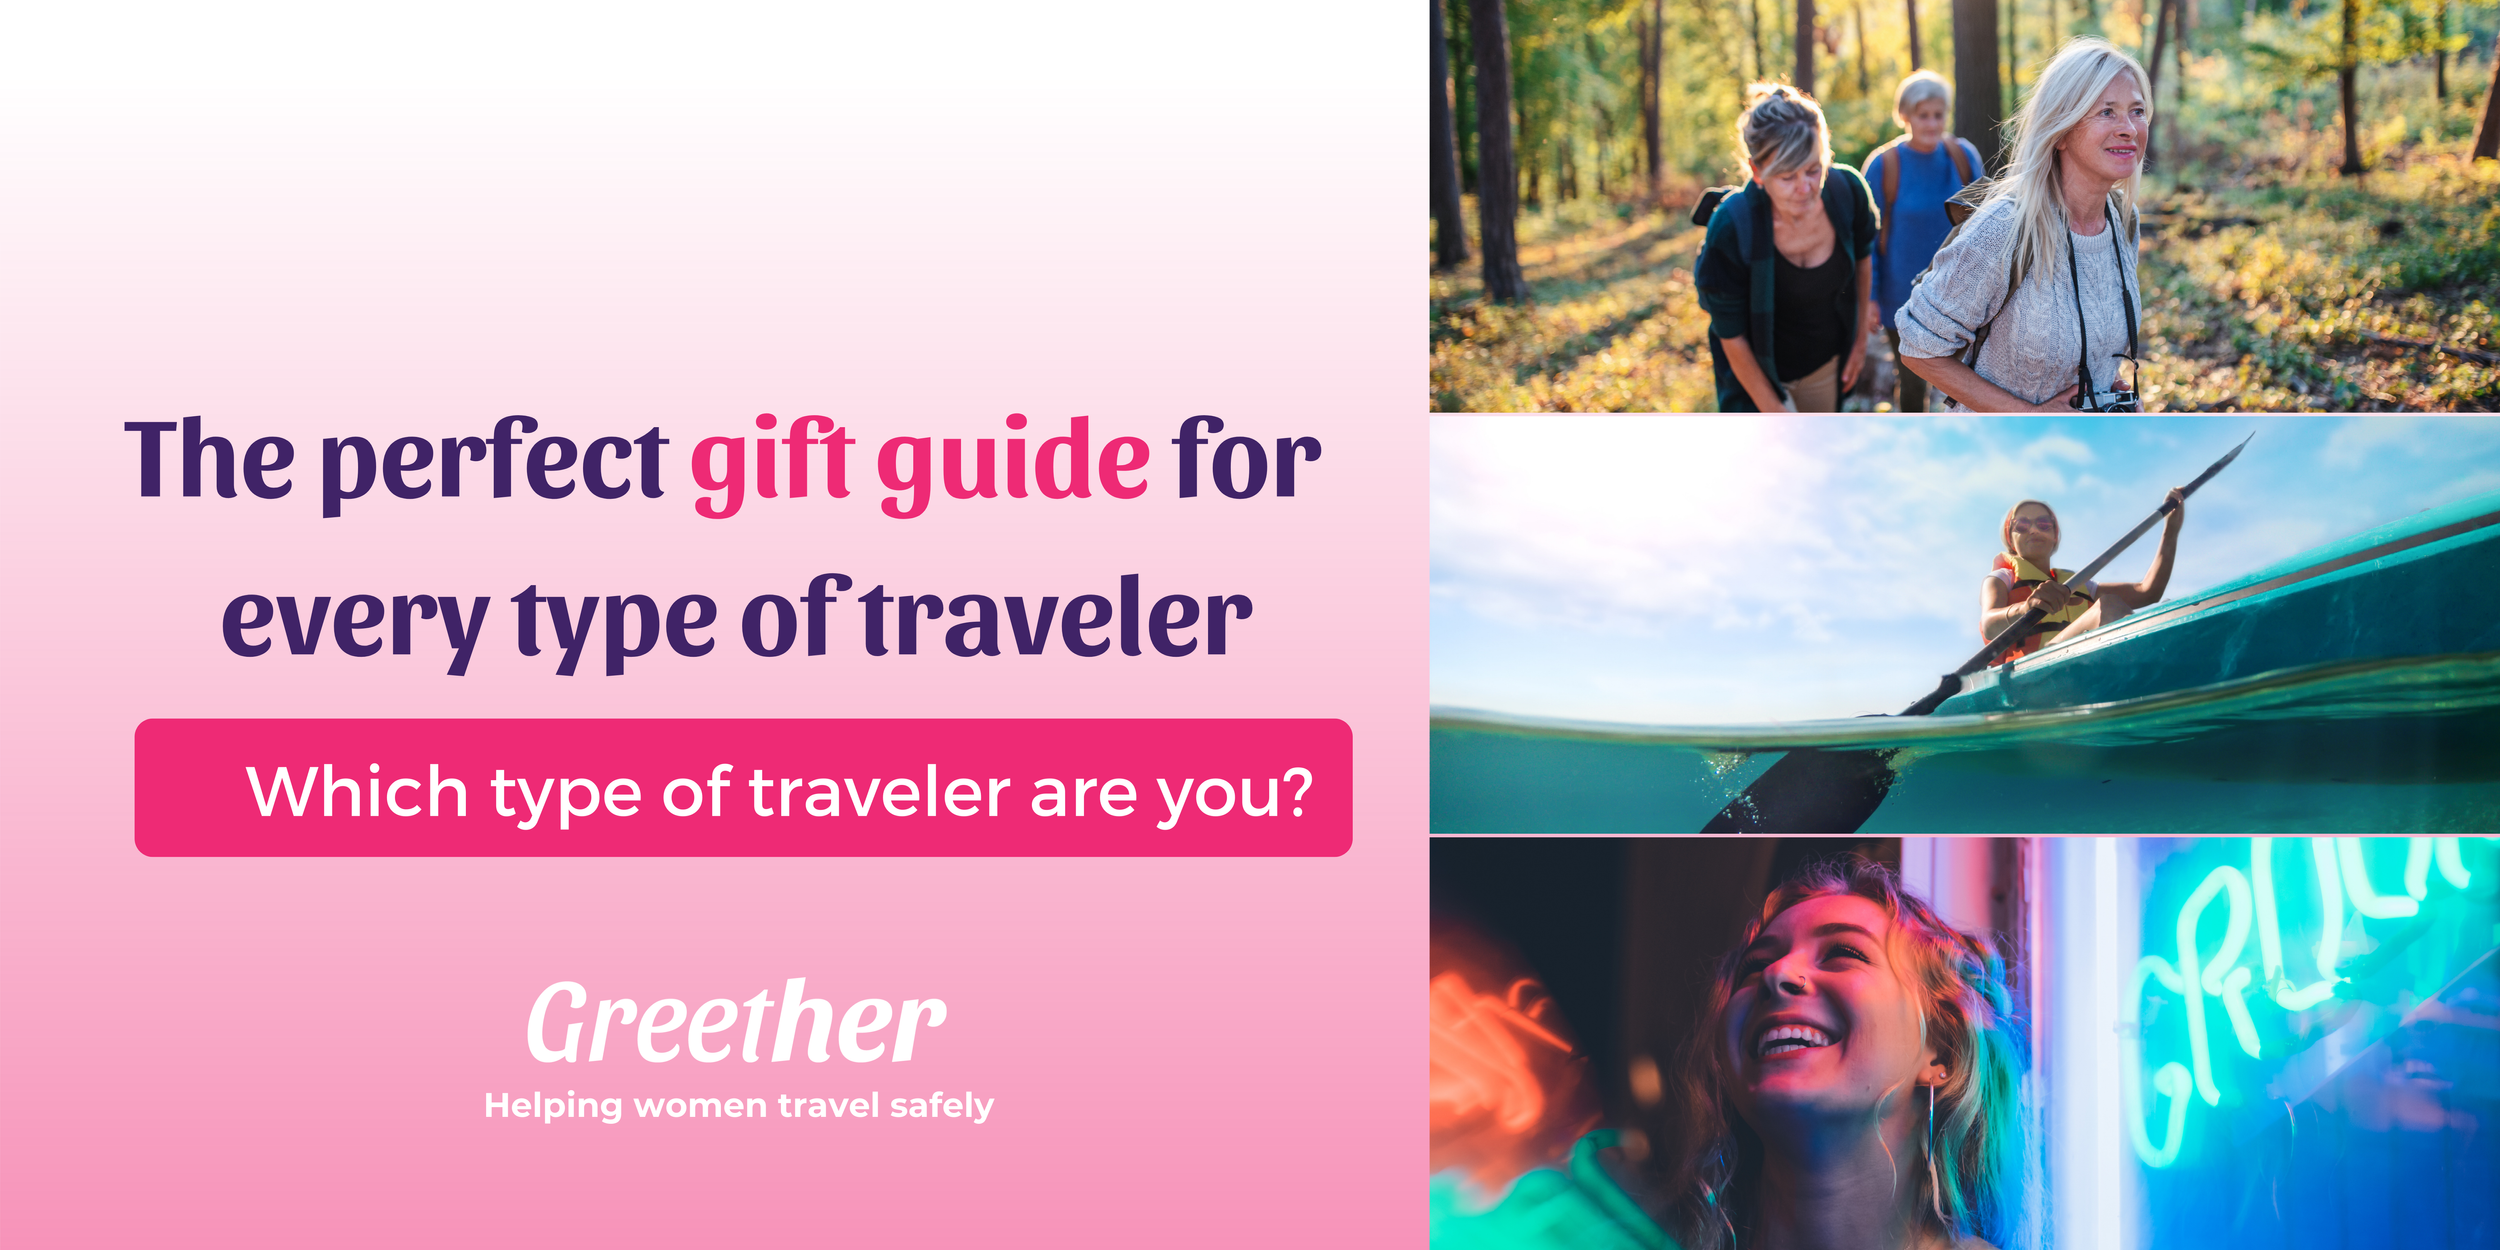 The perfect gift guide for every type of traveler